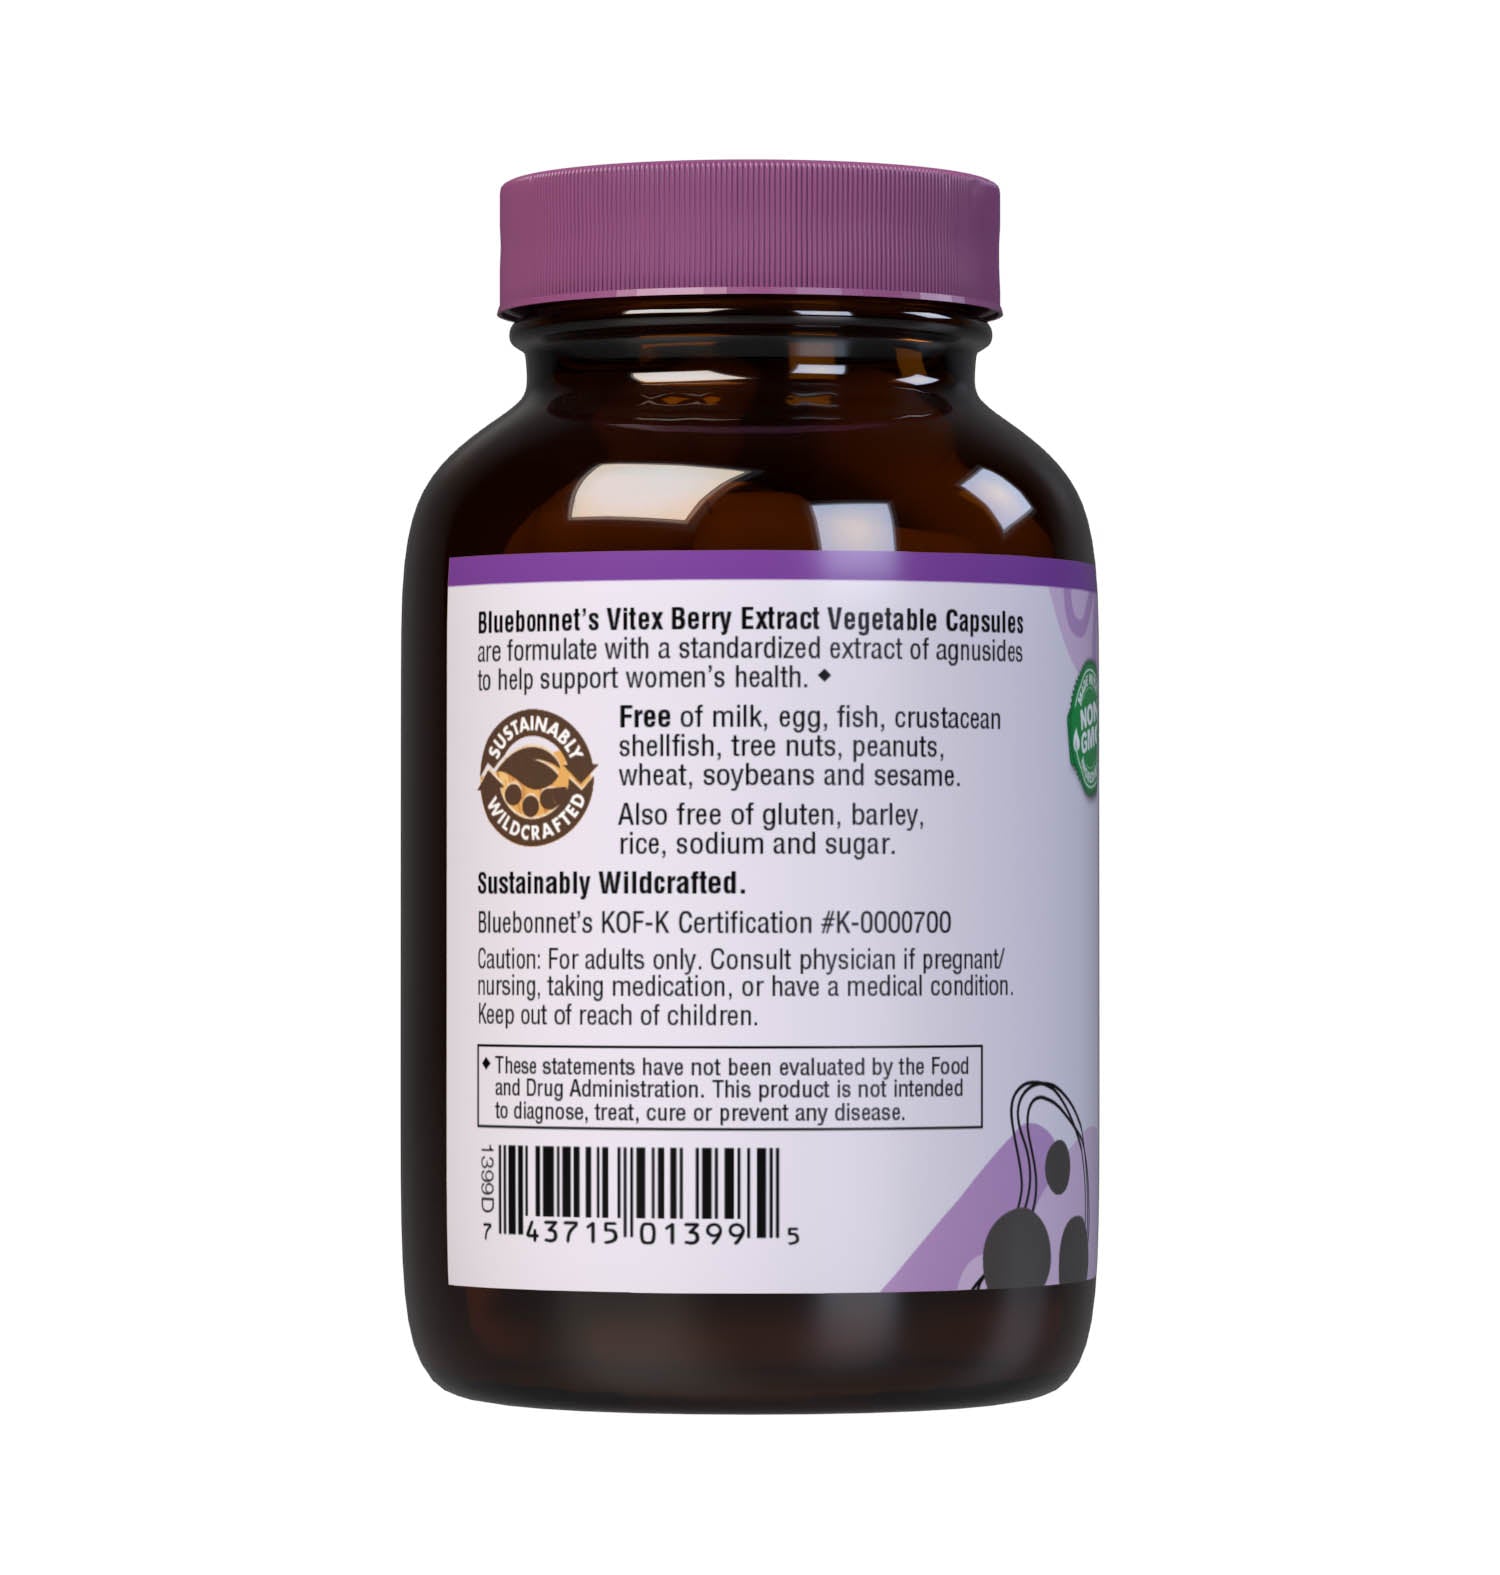 Bluebonnet’s Vitex Berry Extract 60 Vegetable Capsules contain a standardized extract of agnusides, the most researched active constituents found in vitex, which may support women's health. A clean and gentle water-based extraction method is employed to capture and preserve vitex’s most valuable components. Description panel. #size_60 count